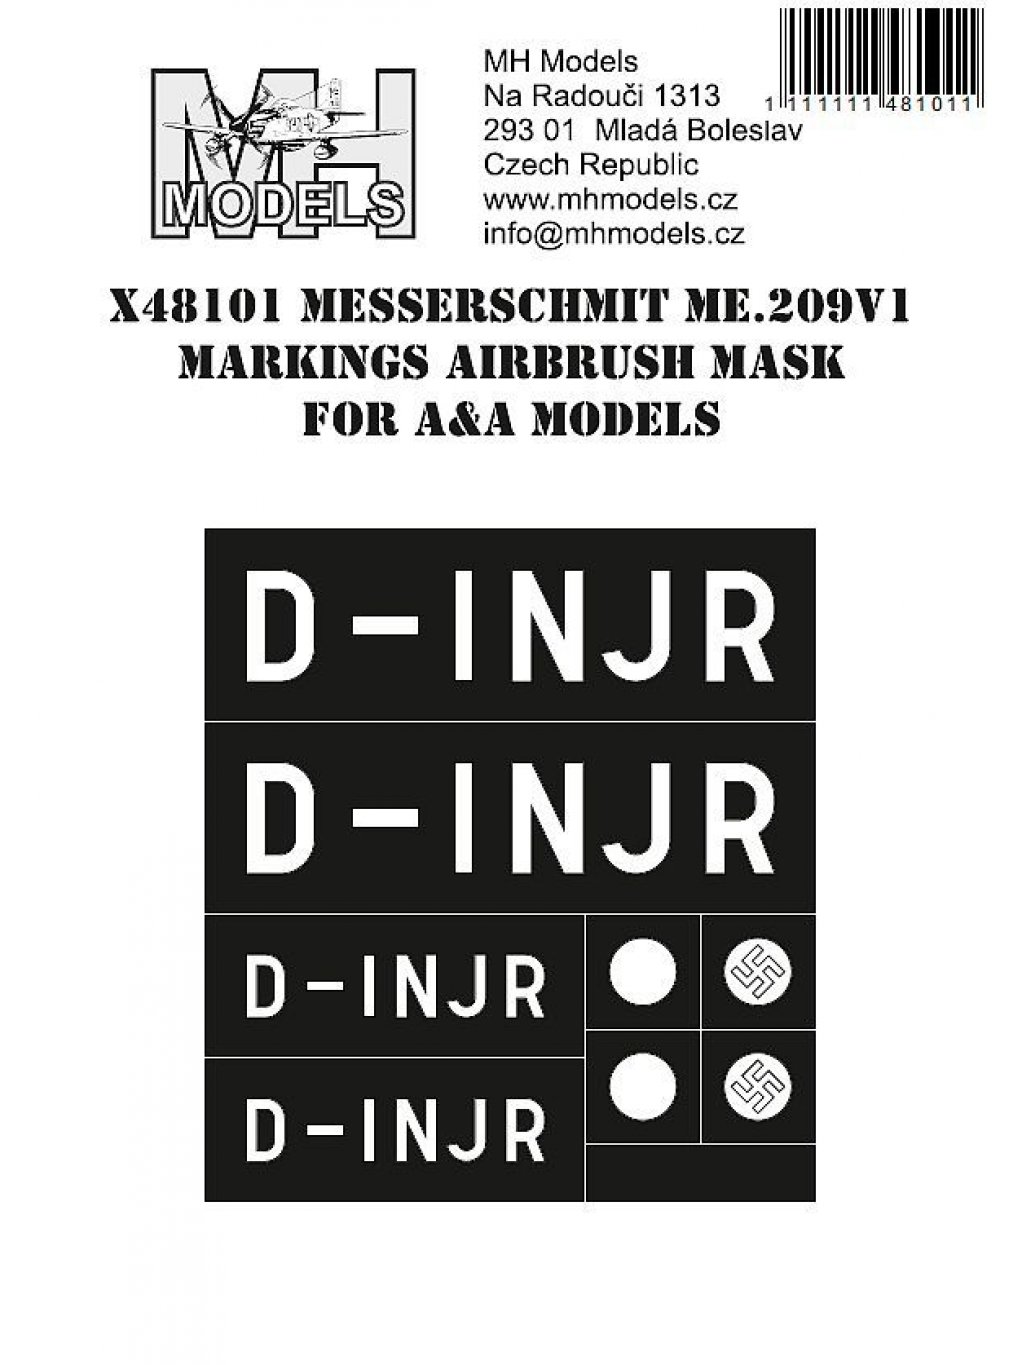 Messerschmit Me.209V1 Markings airbrush mask for A&A Models